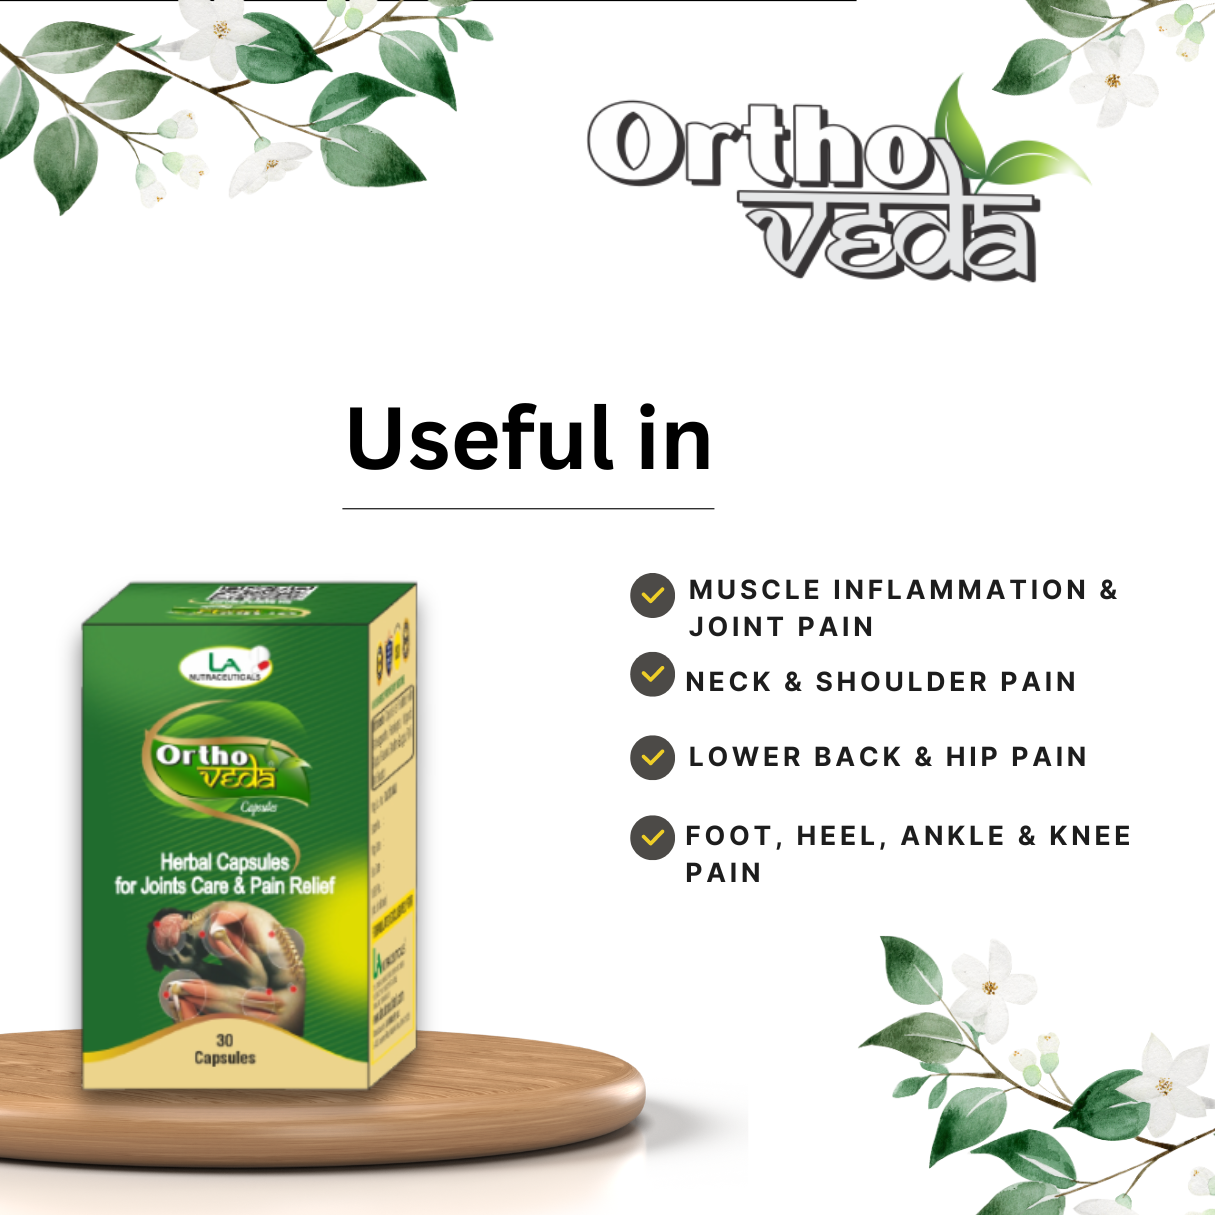 Orthoveda Capsules - effective for All Kinds of Joint Pain